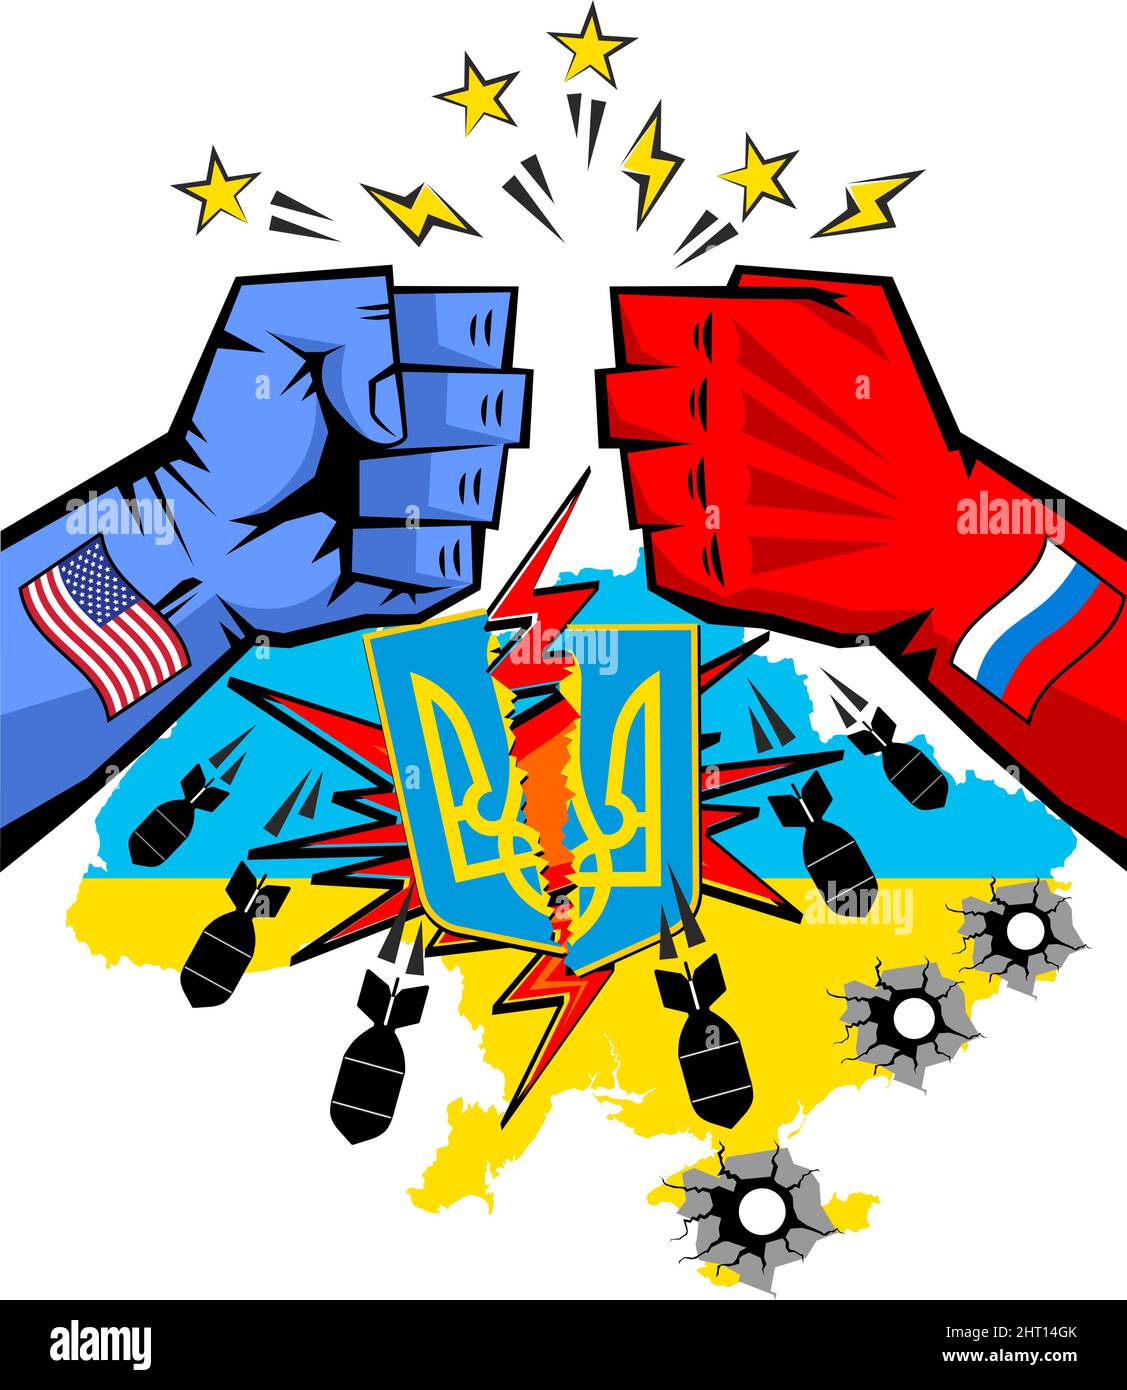 Poster Battle of giants for Ukraine. The clash of powerful fists of the USA and Russia, a broken coat of arms and bullet holes on the map of Ukraine, Stock Vector